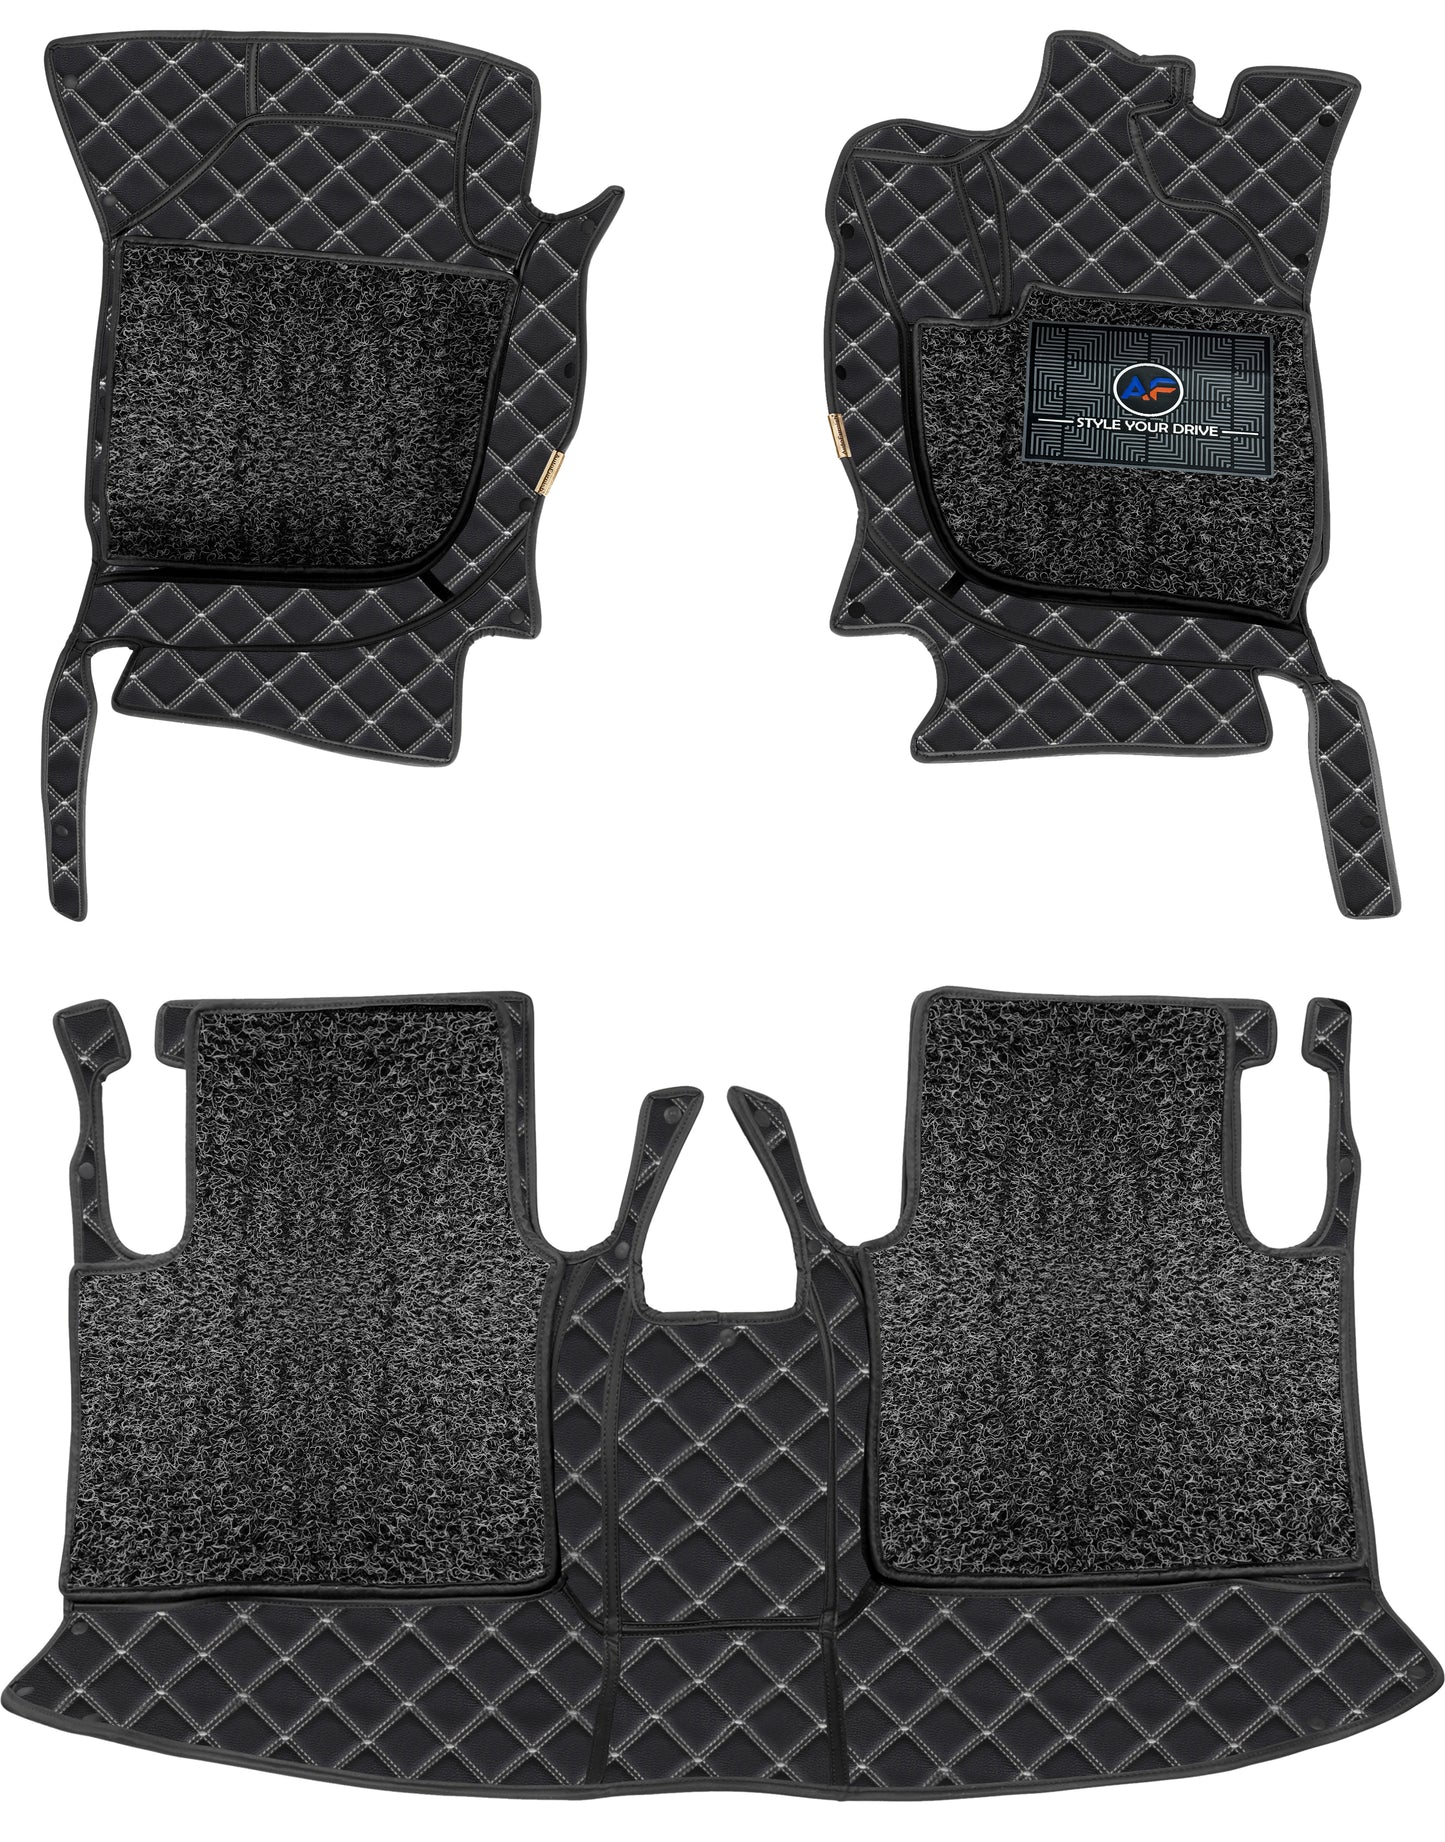 Hyundai Eon 2018 7D Luxury Car Mat, All Weather Proof, Anti-Skid, 100% Waterproof & Odorless with Unique Diamond Fish Design (24mm Luxury PU Leather, 2 Rows)